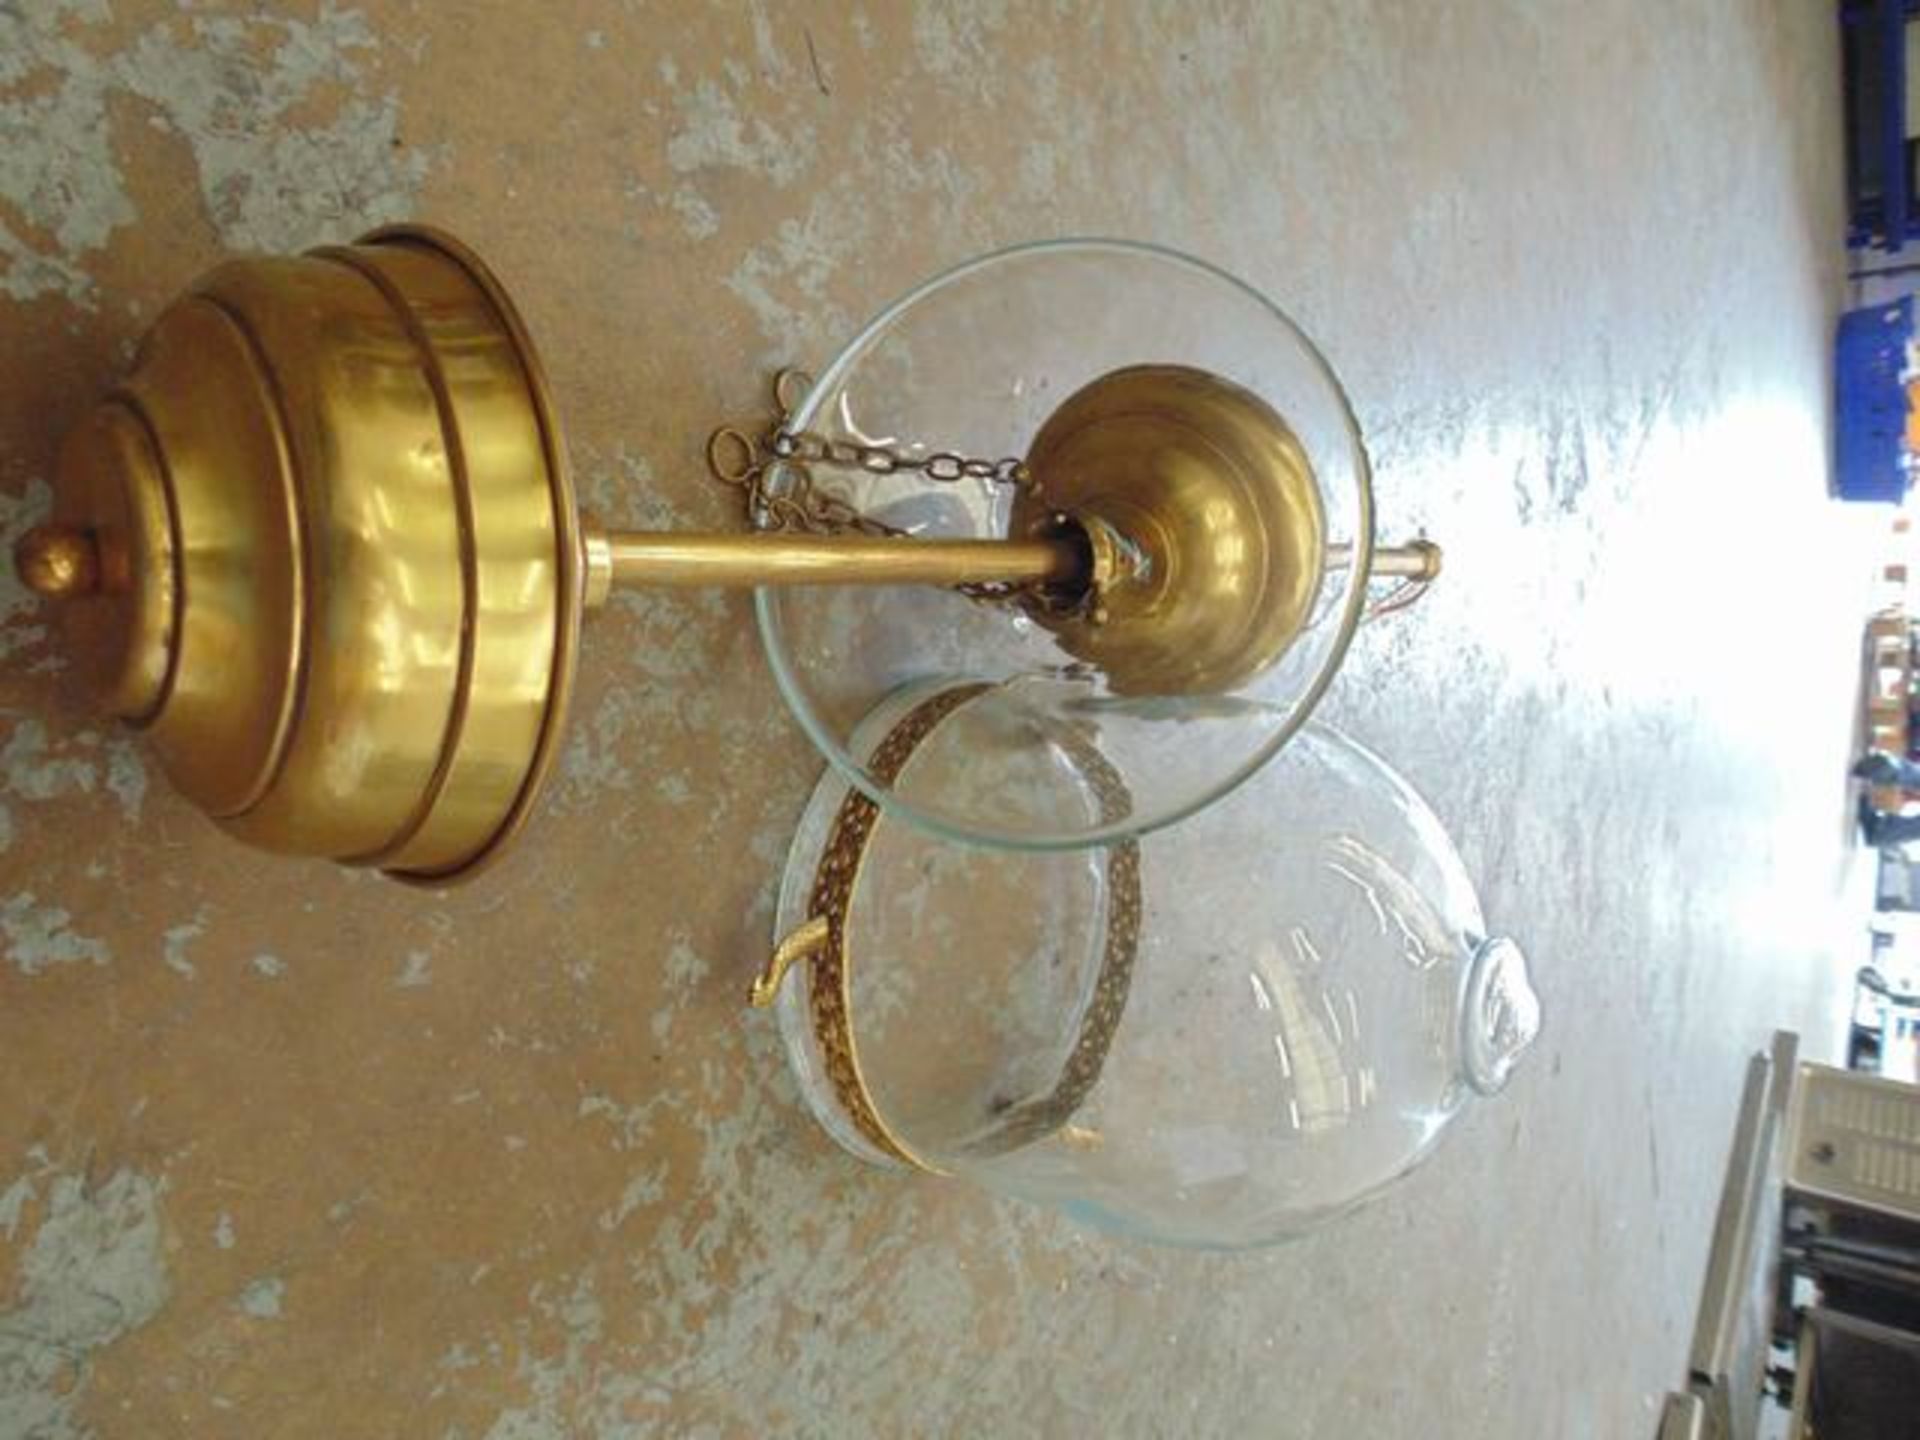 Bell jar foyer pendant 3 light candelabra clear glass shade decorated with antique brass and brass